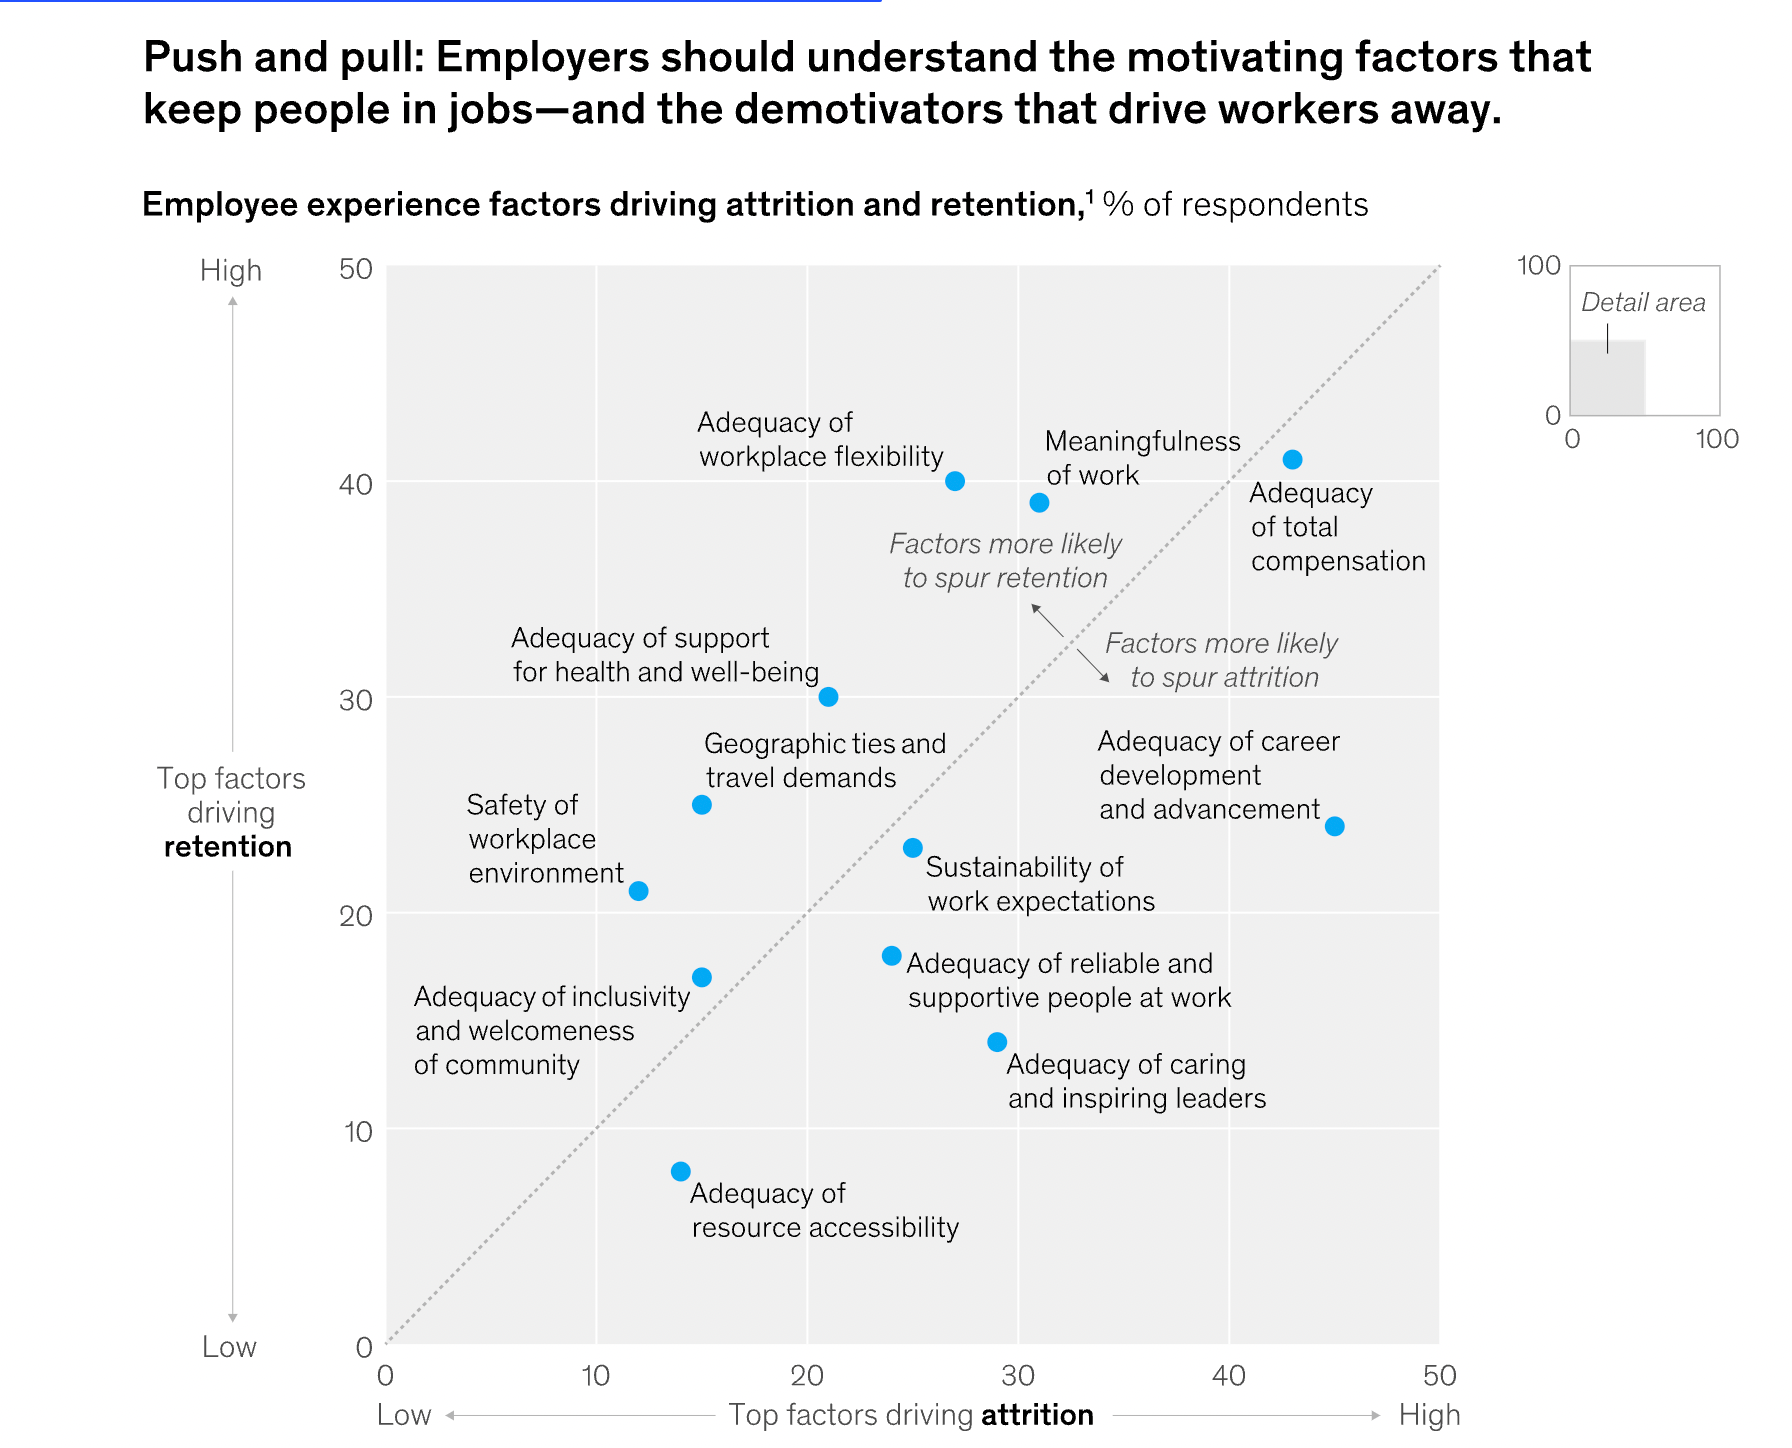 McKinsey Research: Top factors driving employee retention and employee attrition. 